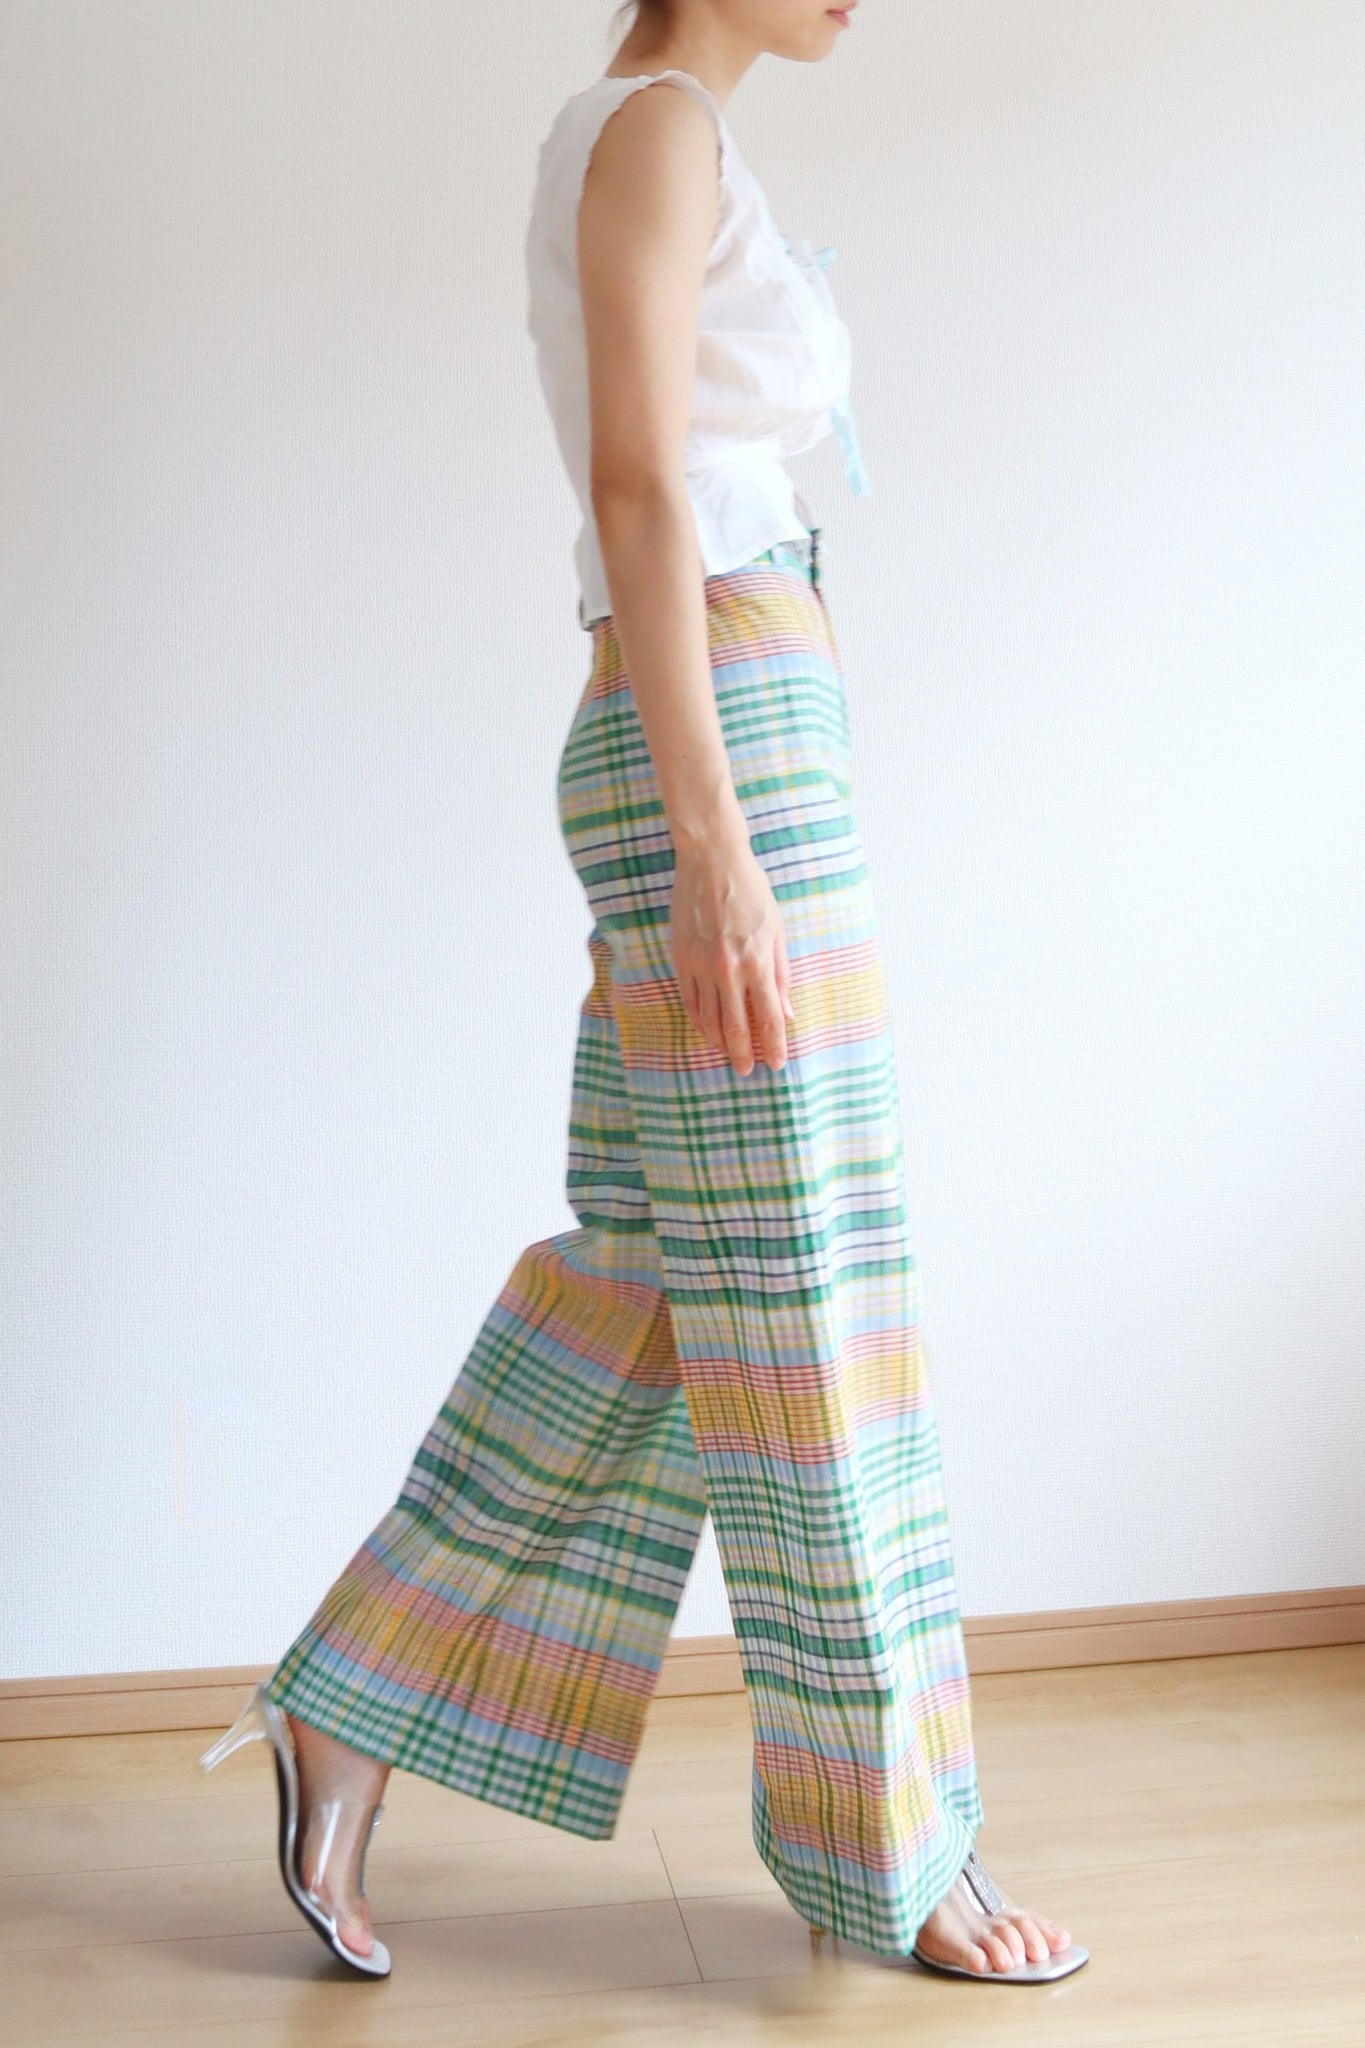 70s Dead Stock Summer Check Pants